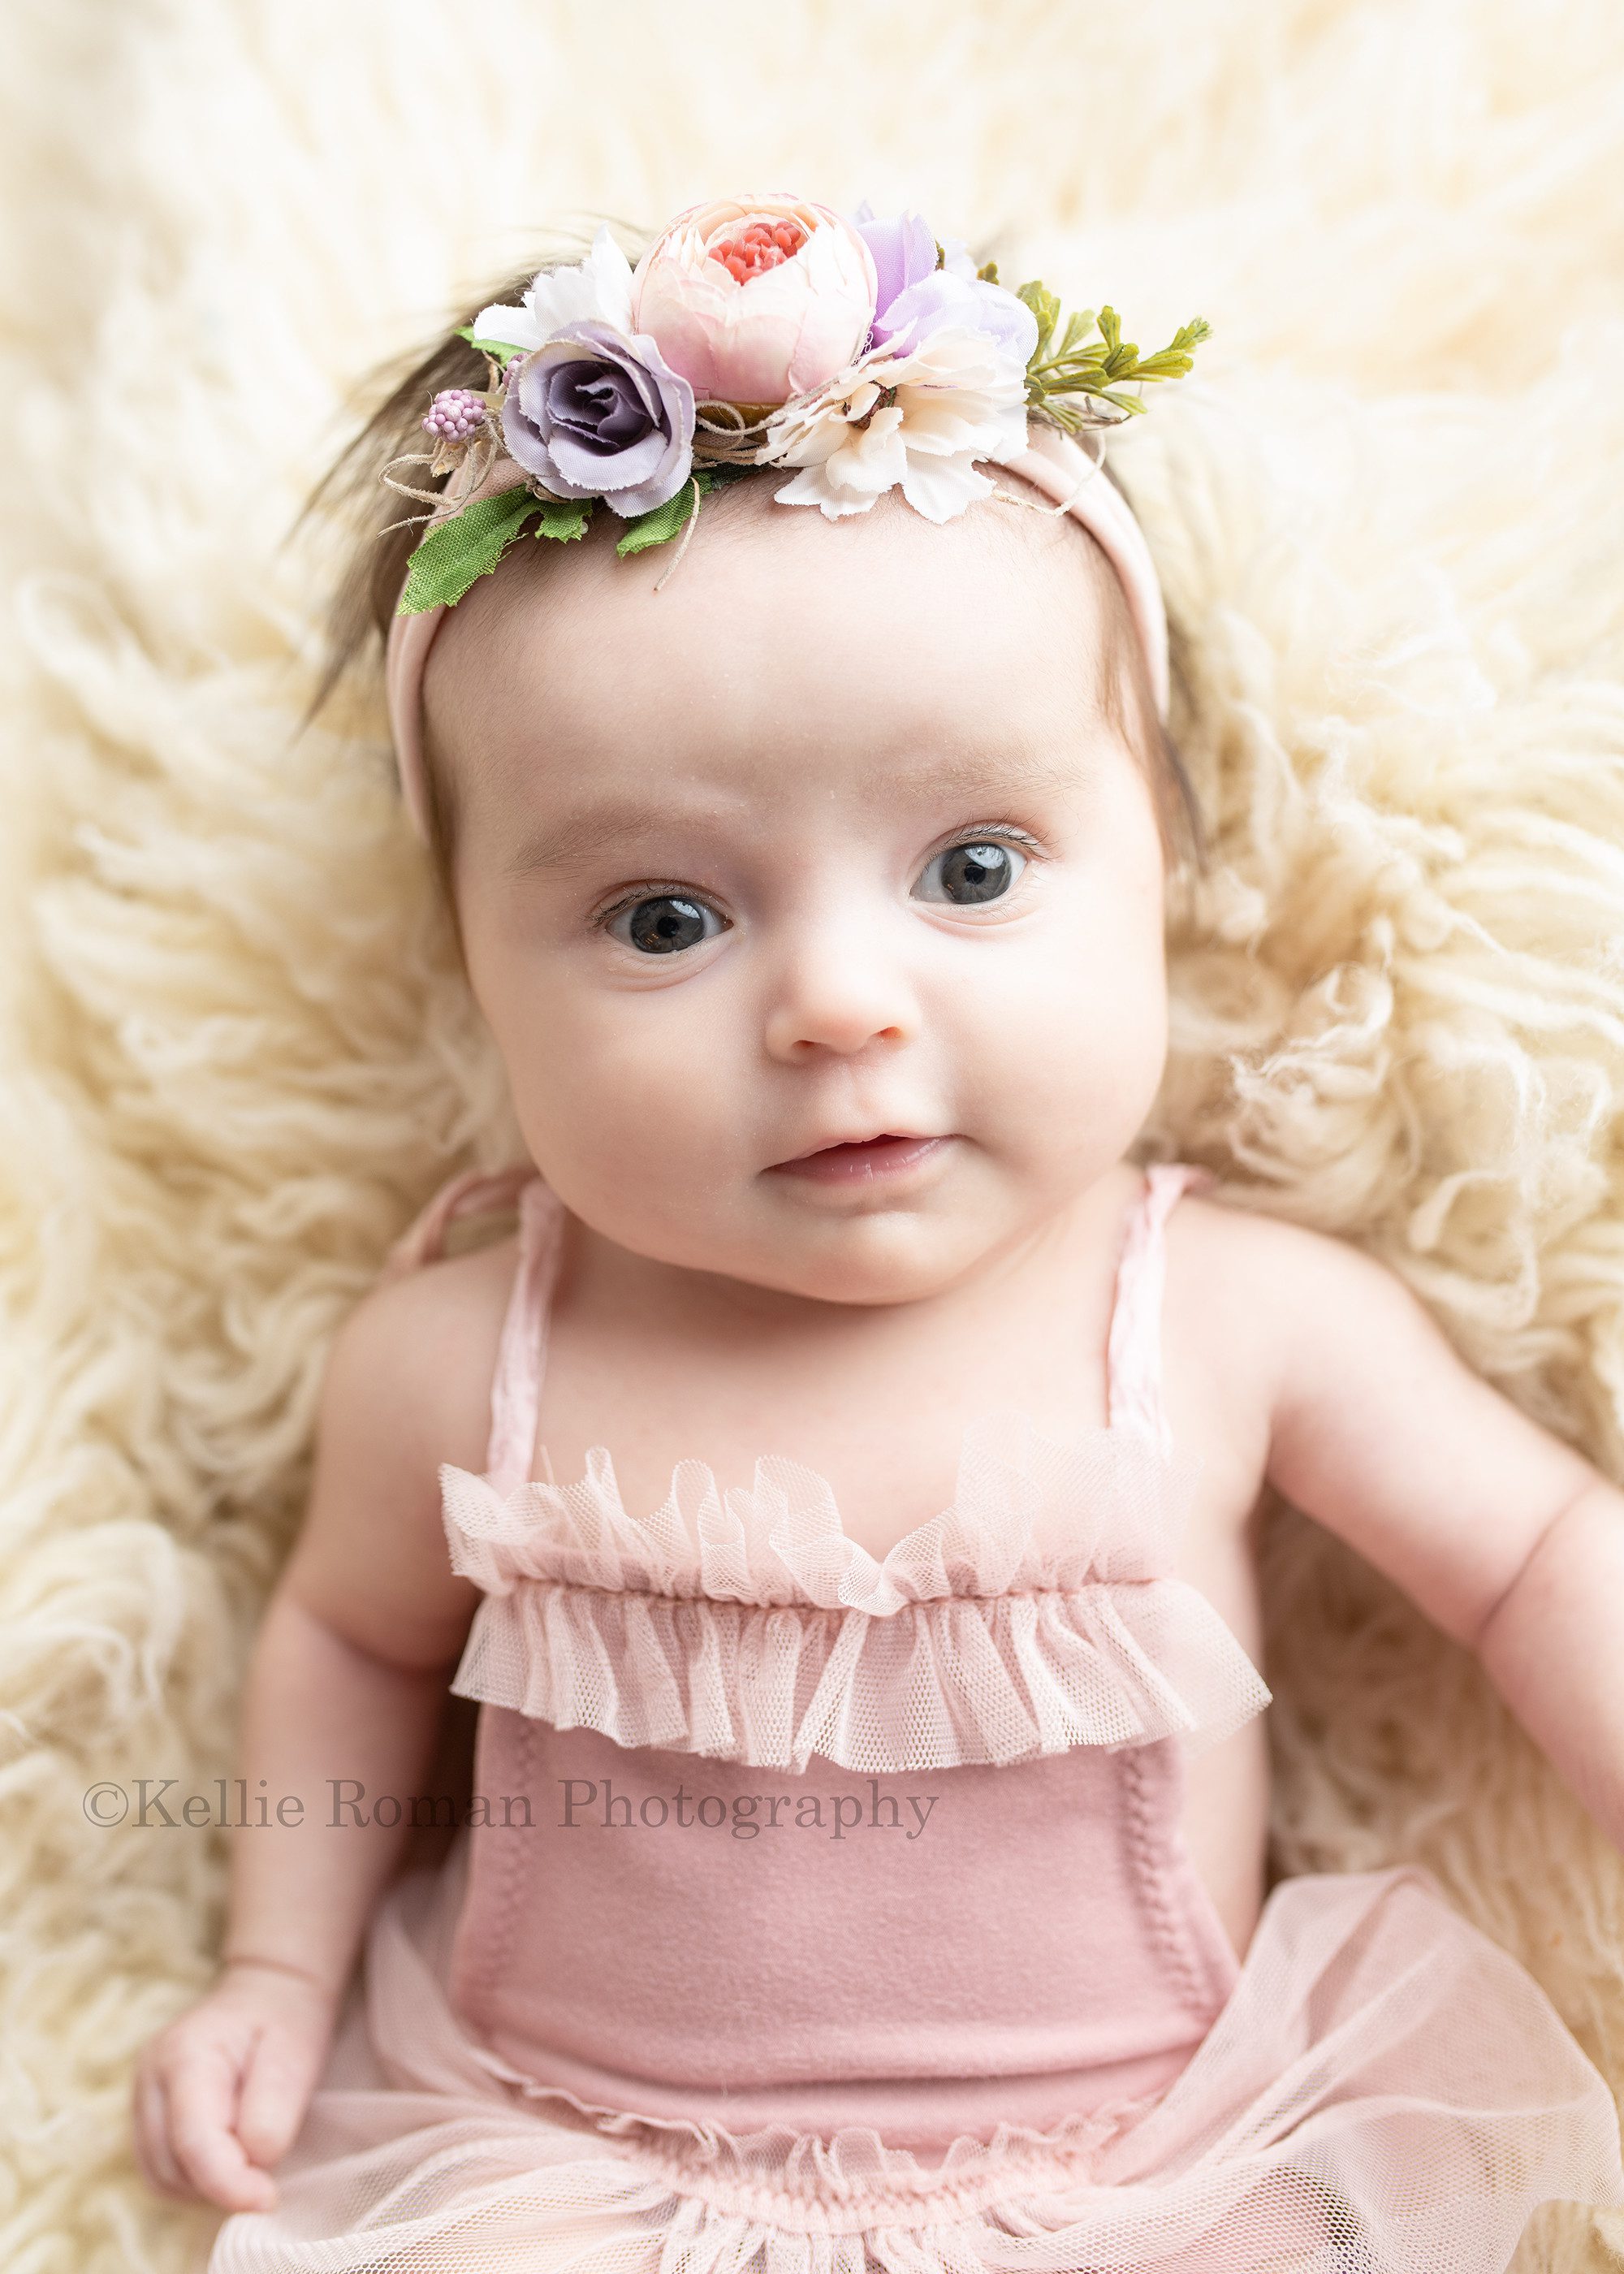 sweet newborn a newborn baby girl is in milwaukee photographers studio she is laying on top of cream color fur rug and is wearing a blush colored tutu newborn romper and a blush and purple floral headband she has a serious face but is looking into the camera